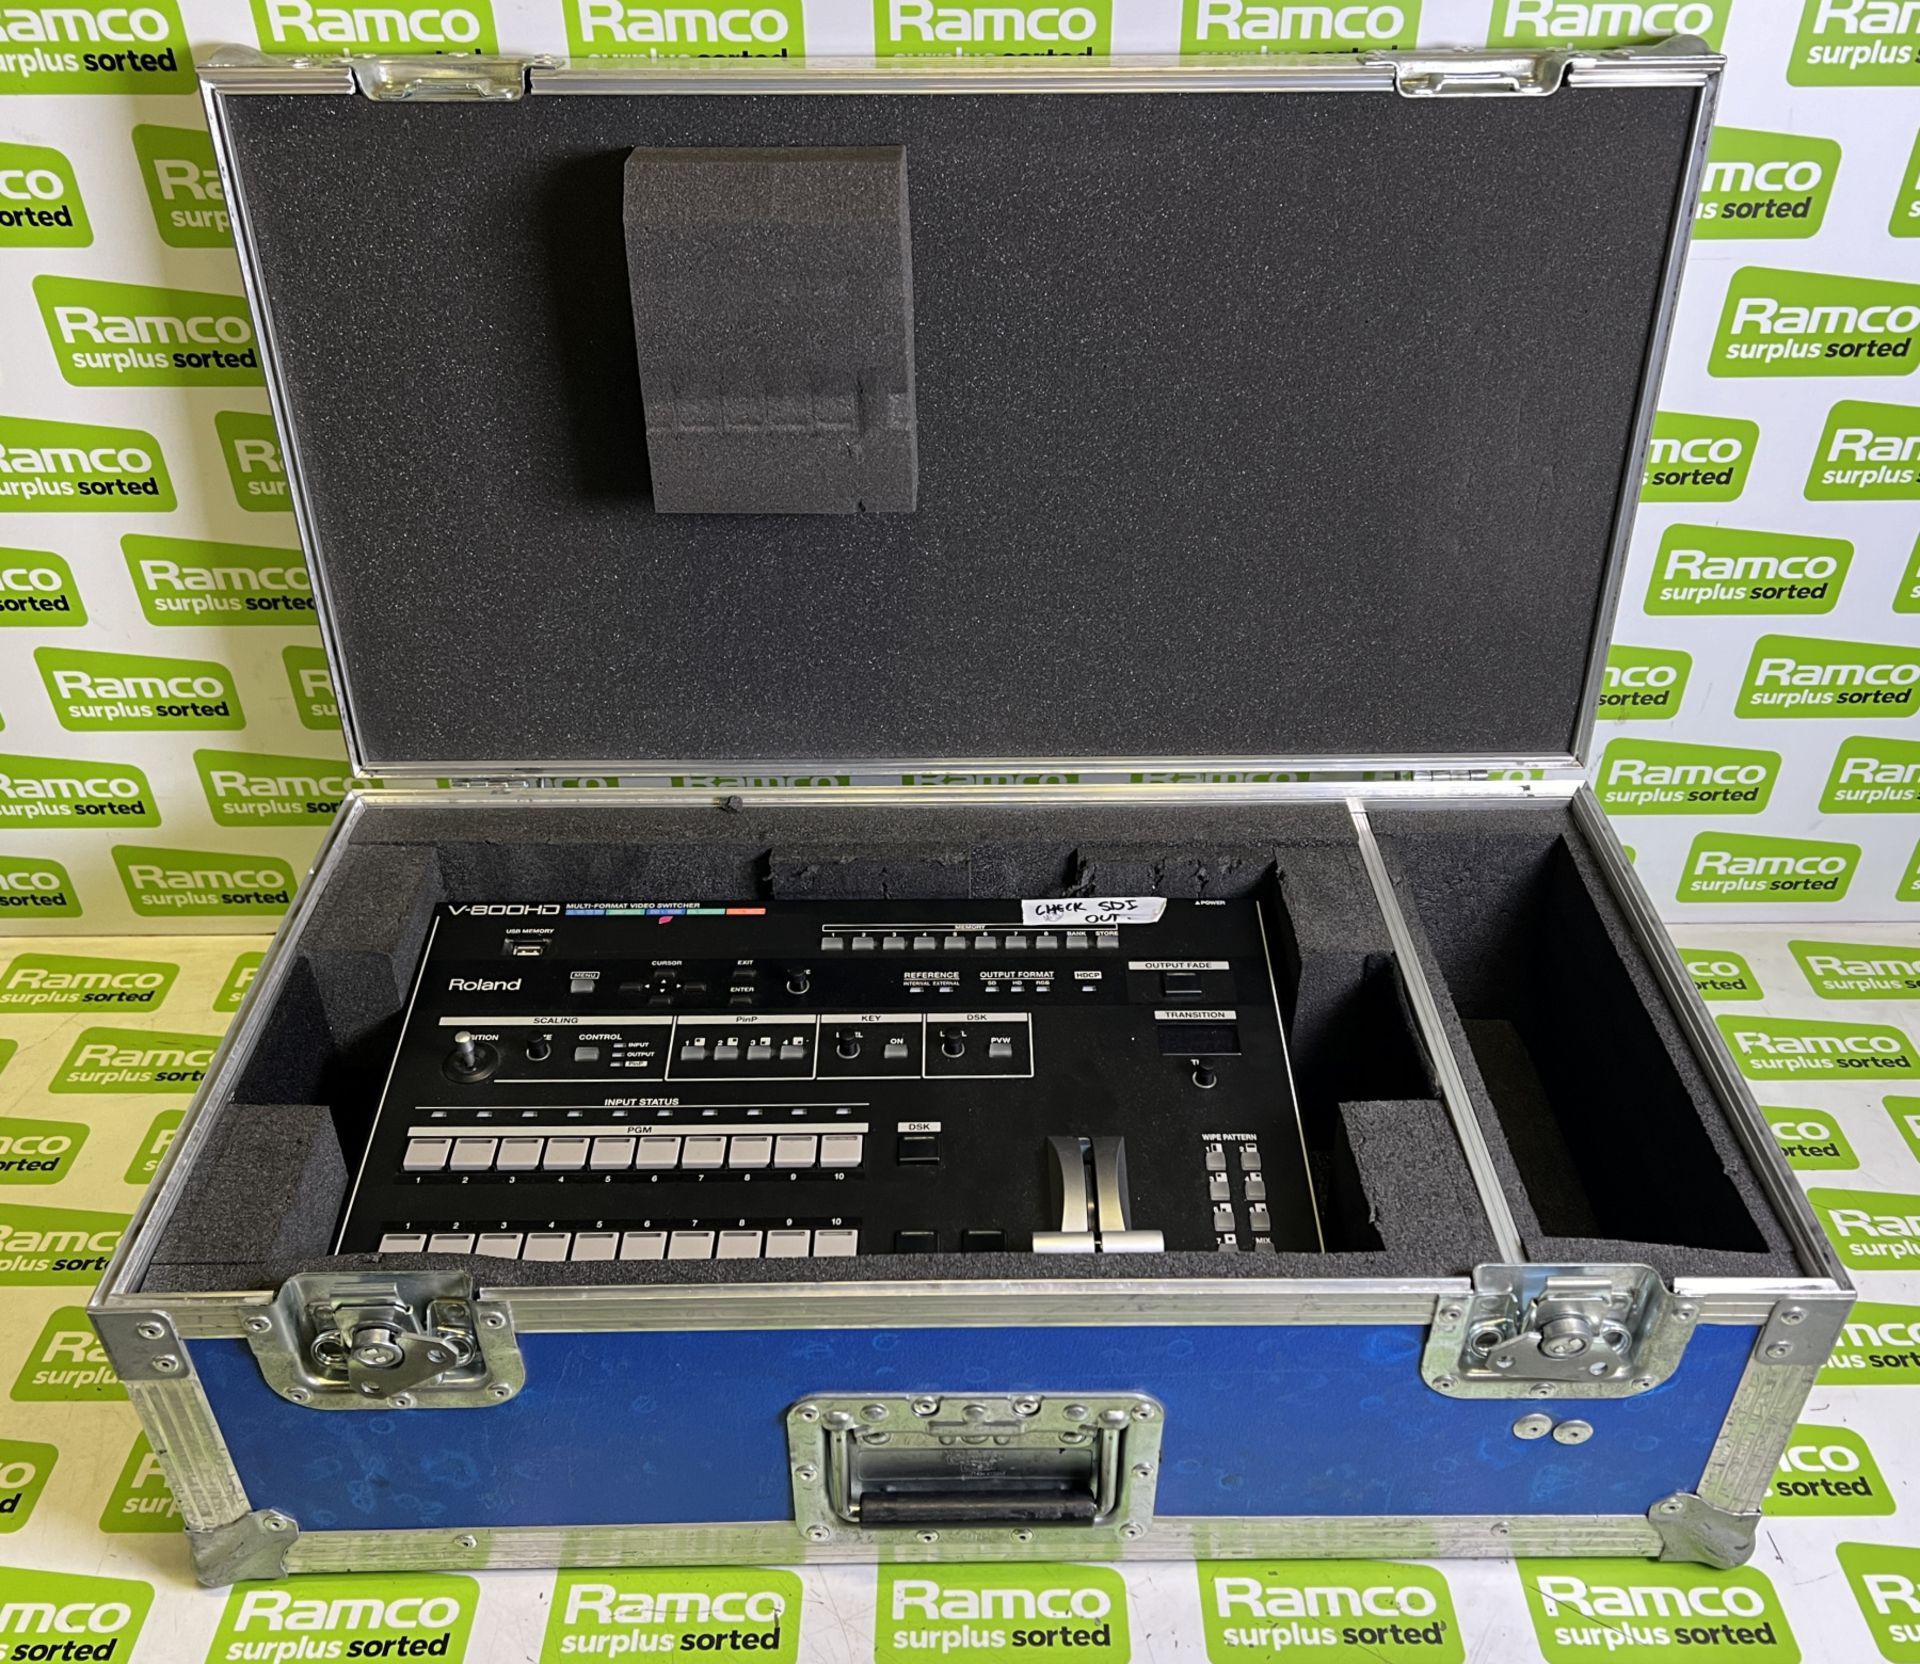 Roland V800HD vision mixer in flight case - case dimensions: L 690 x W 370 x H 230mm - FAULTY OUTPUT - Image 7 of 8